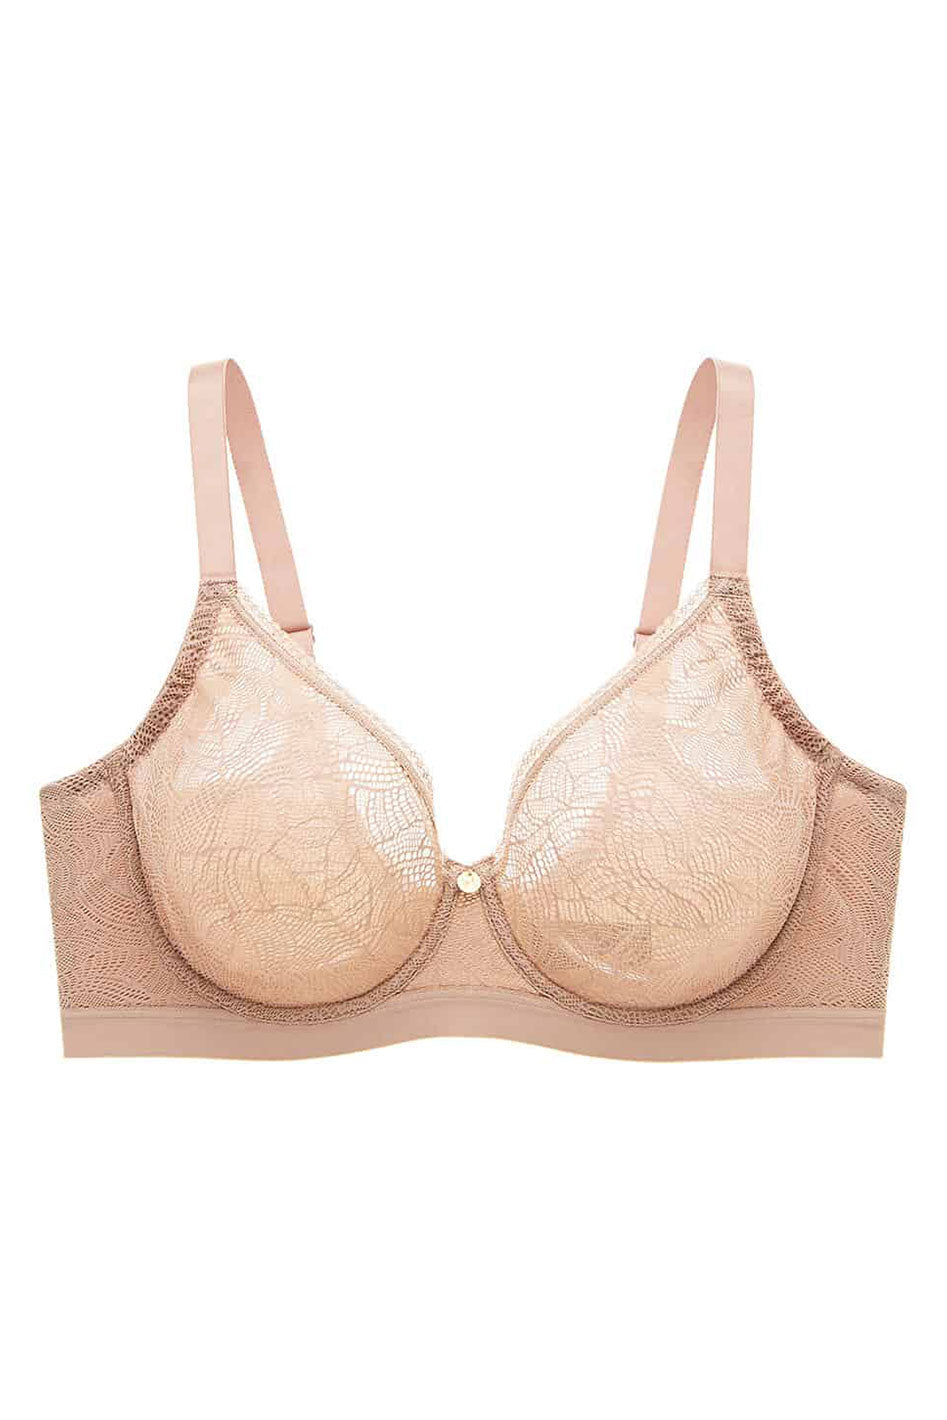 Sports Bra suggestions for 30G (US) - Tall and wide roots, even